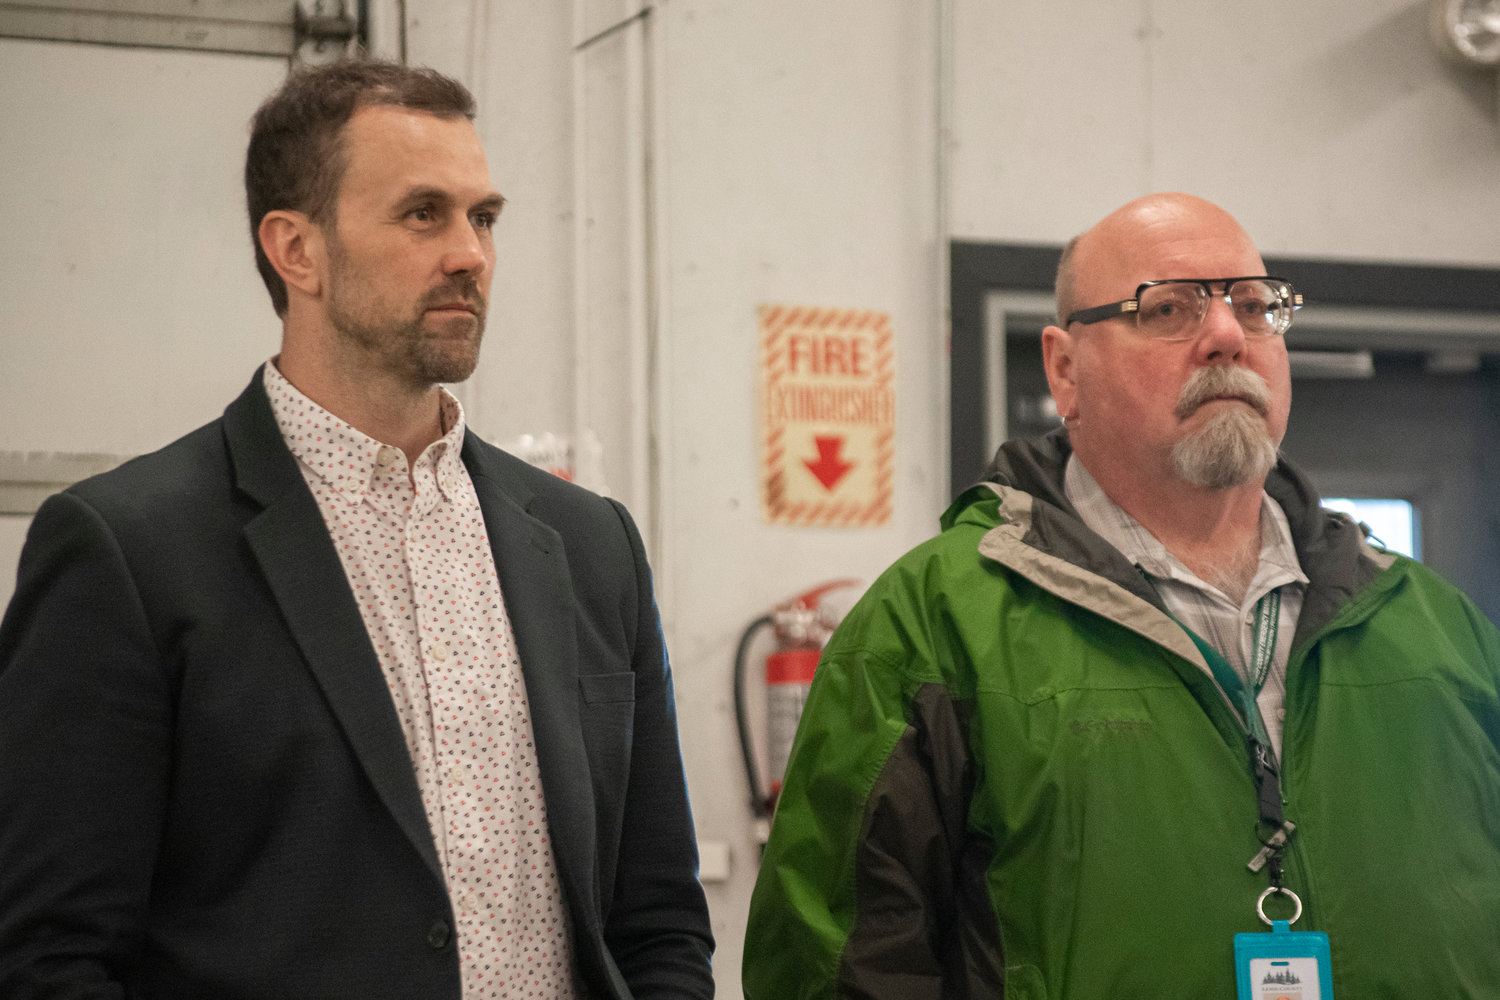 Lewis County Commissioner Sean Swope (left), and Department of Emergency Management Deputy Director Ross McDowell listen during a facilitated public forum on a proposed night-by-night shelter in Lewis County on Thursday night at the Southwest Washington Fairgrounds.